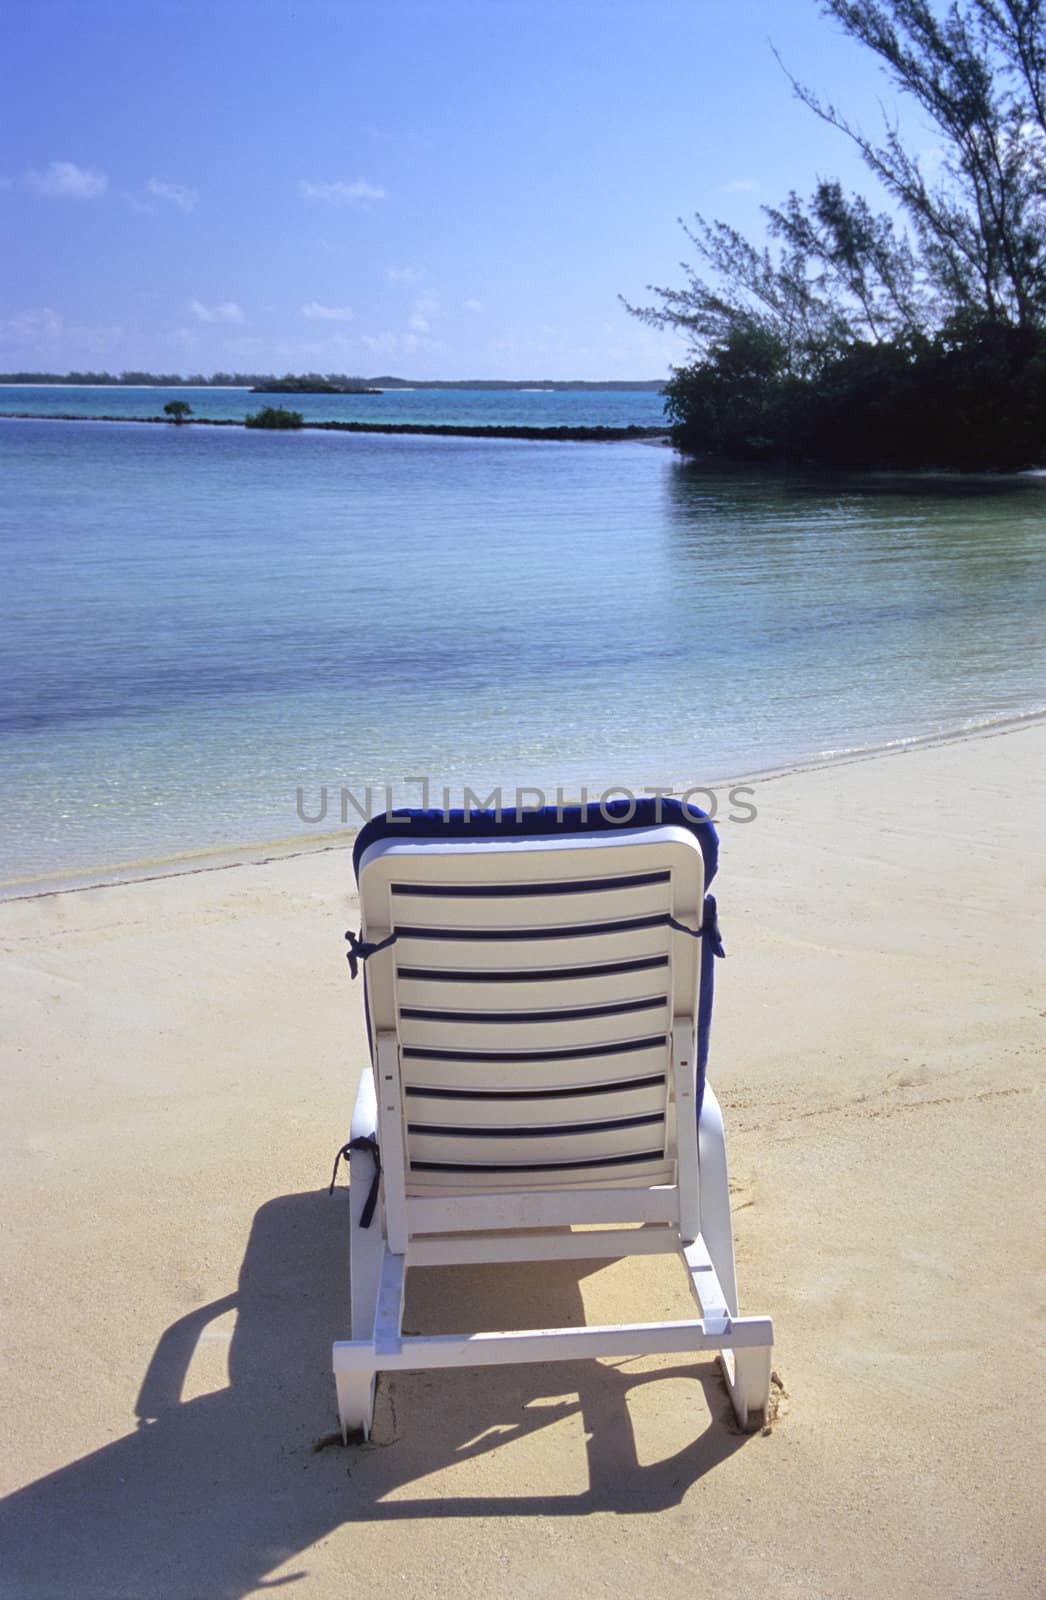 A lounge chair waits for someone to relax in front of the clam waters of the Bahamas.